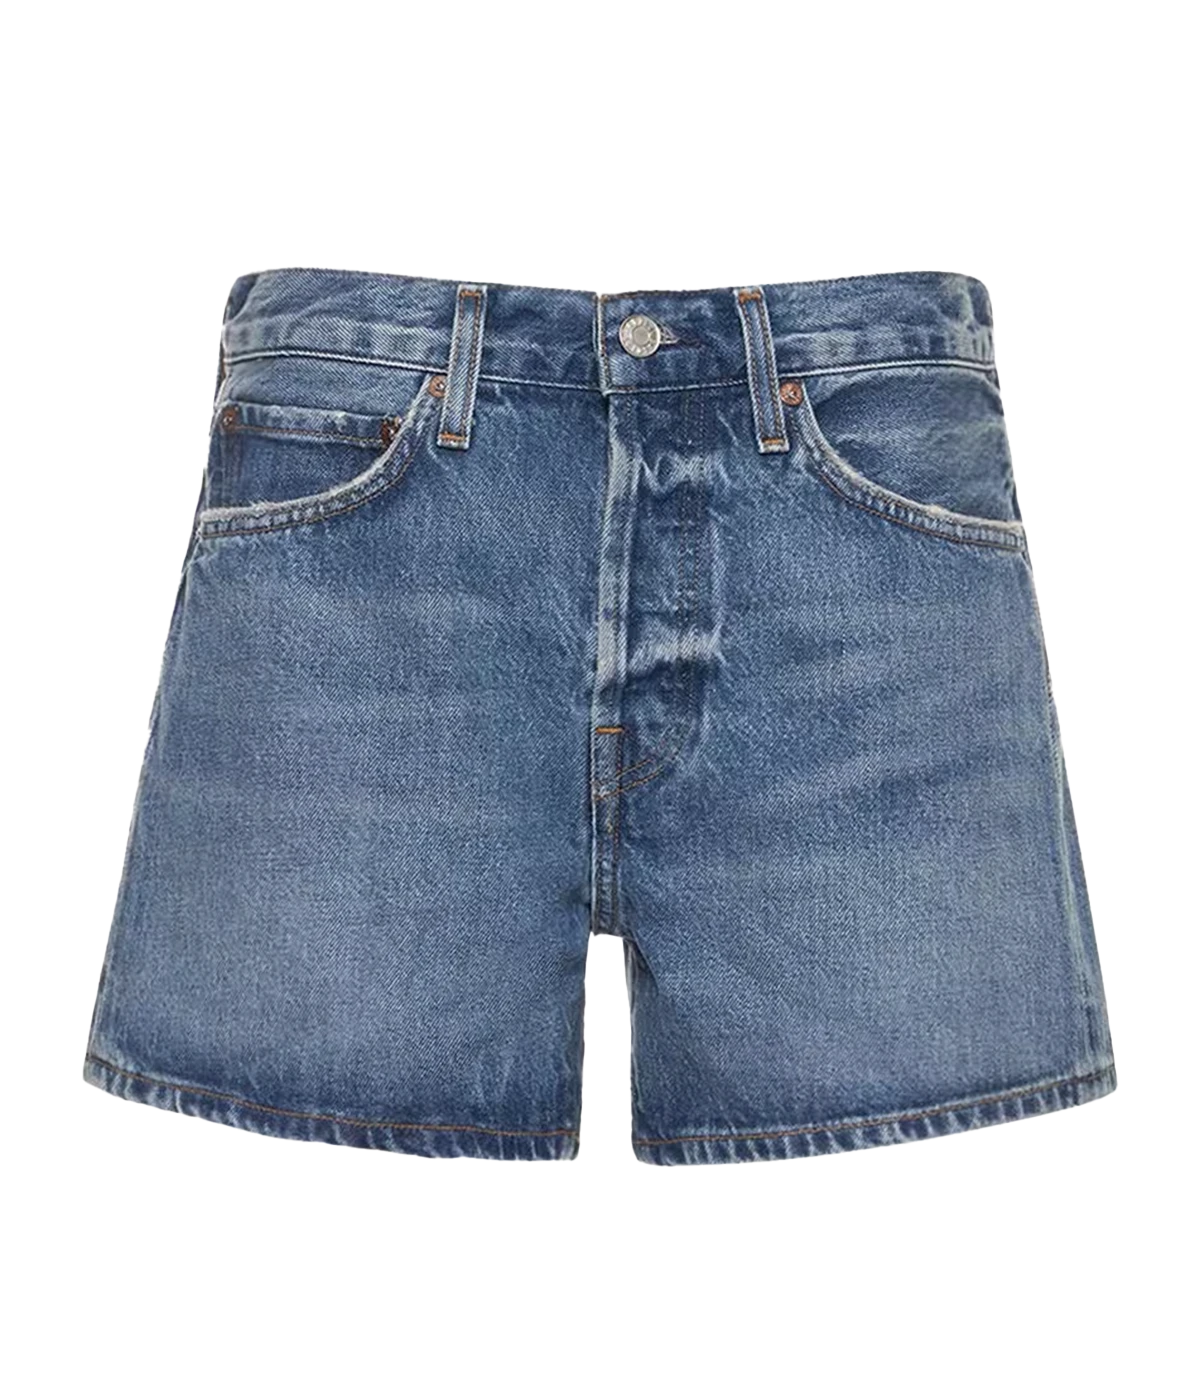 A ridged denim short in a medium blue wash colourway, with a zip and button fly, longer leg and clean hem. Rigid Denim, made in USA, comfortable, summer short, summer staple, everyday basic.